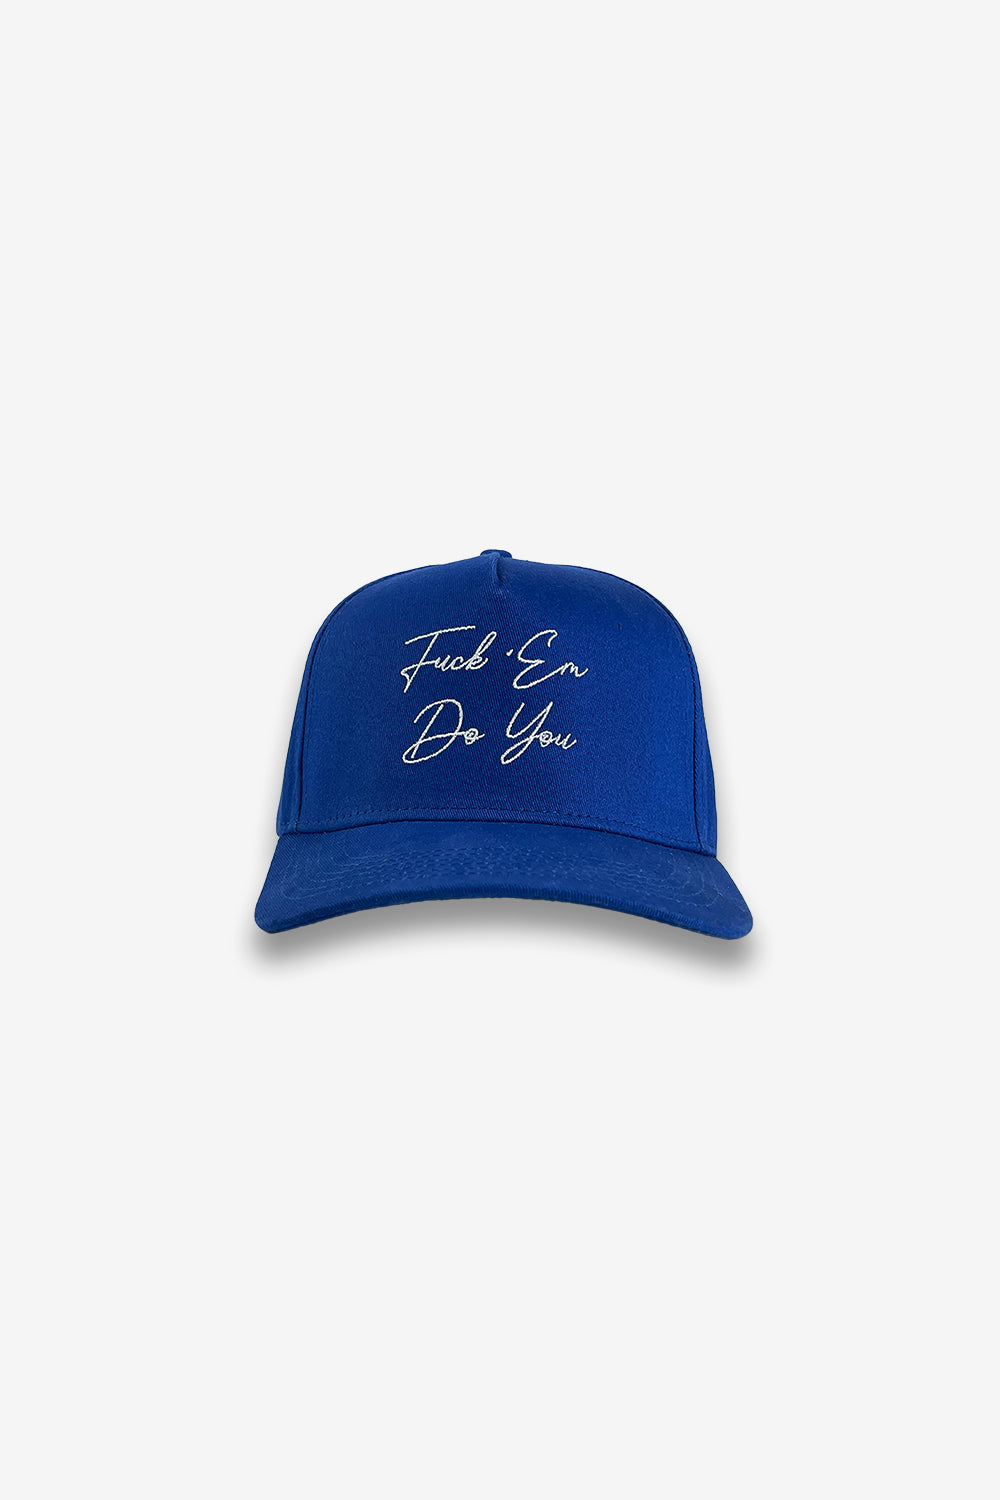 royal blue hat front view